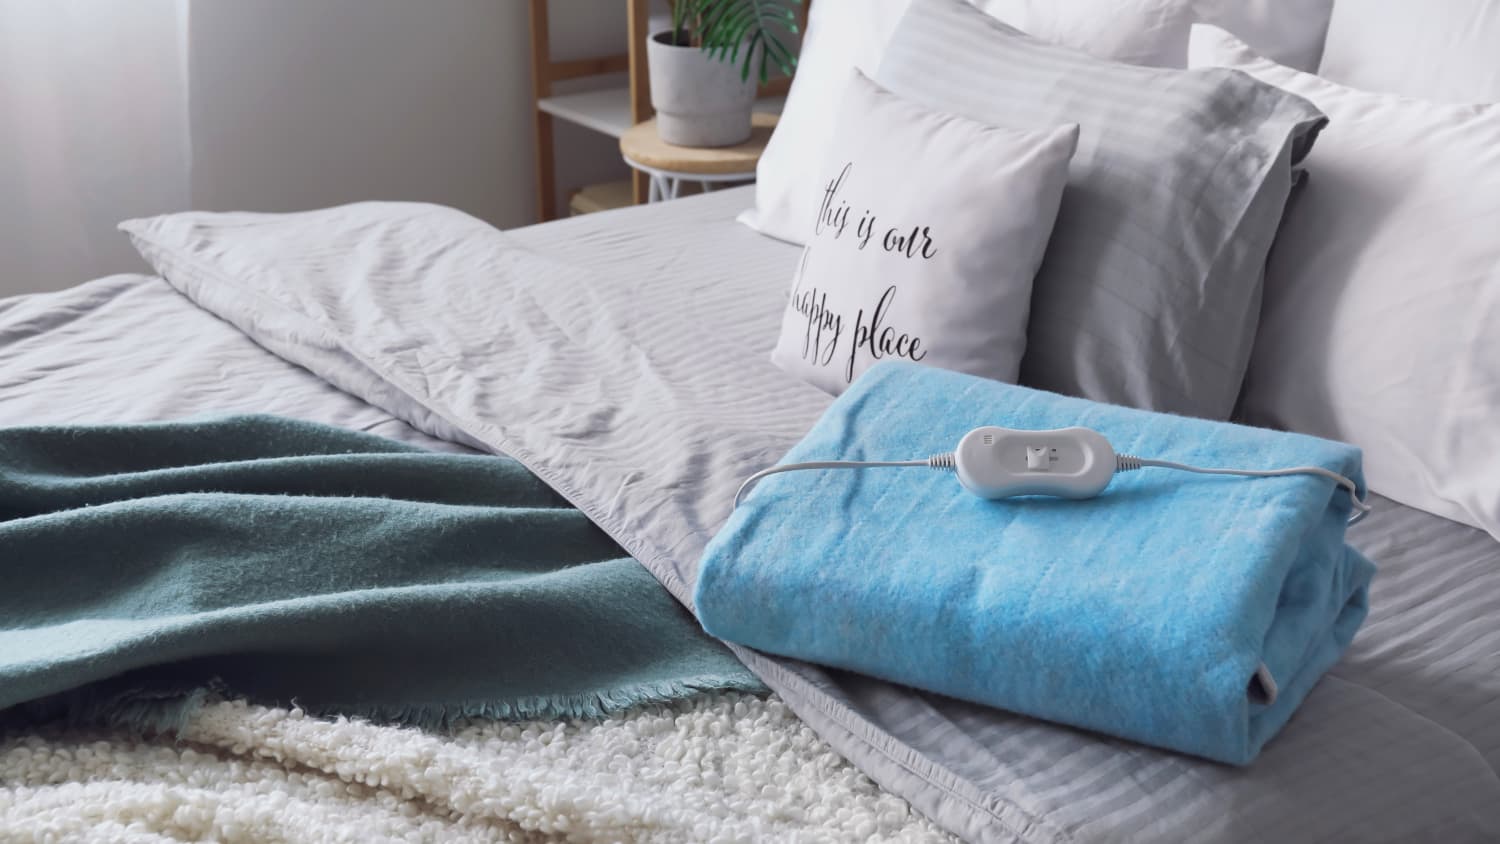 How to Wash an Electric Blanket - Steps to Cleaning an Electric